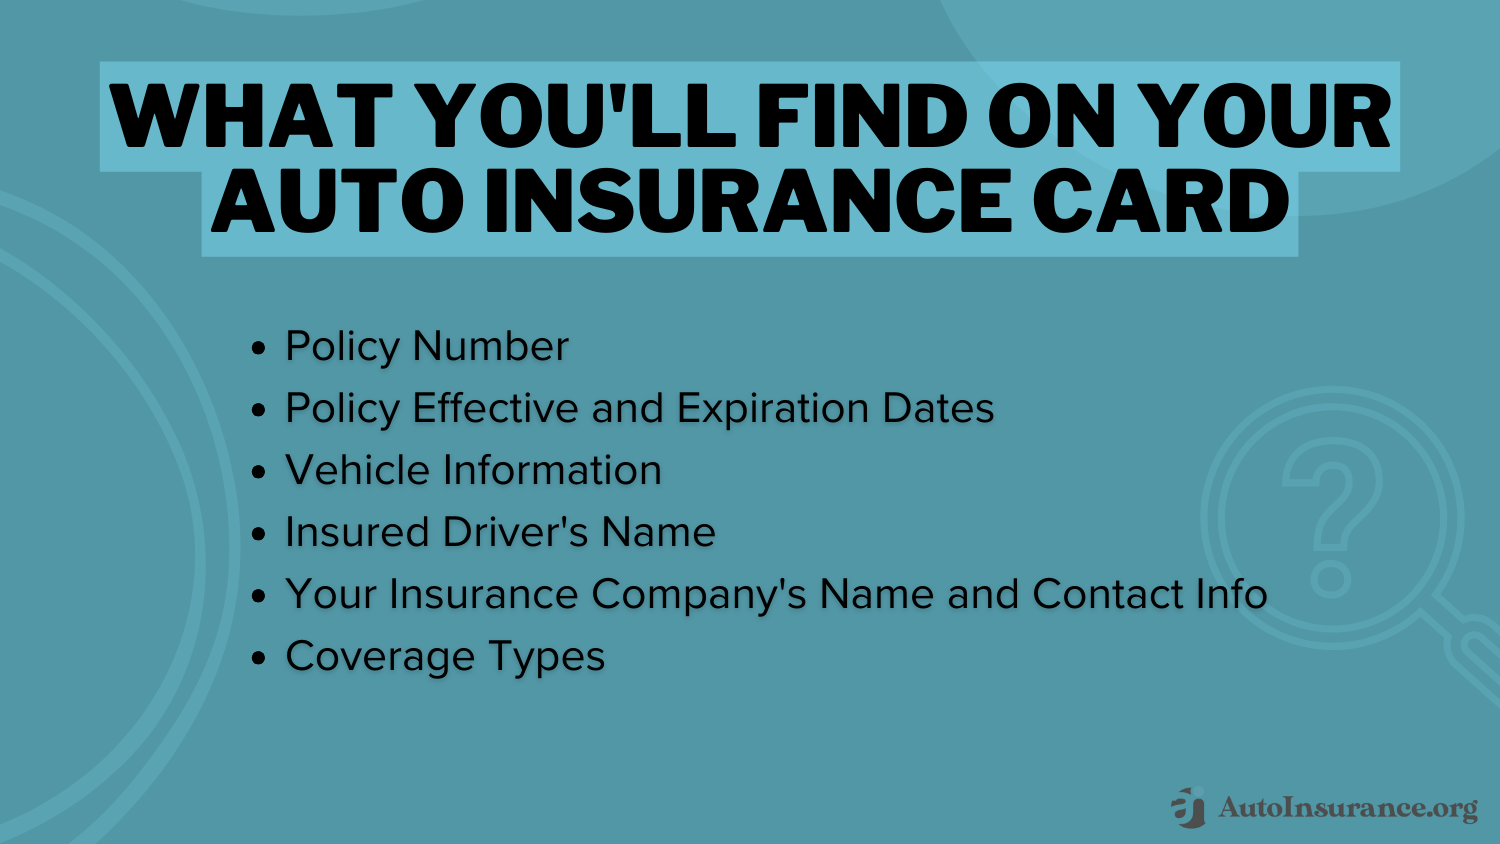 What You'll Find on Your Auto Insurance Card: How to Get a Copy of Your Auto Insurance Card